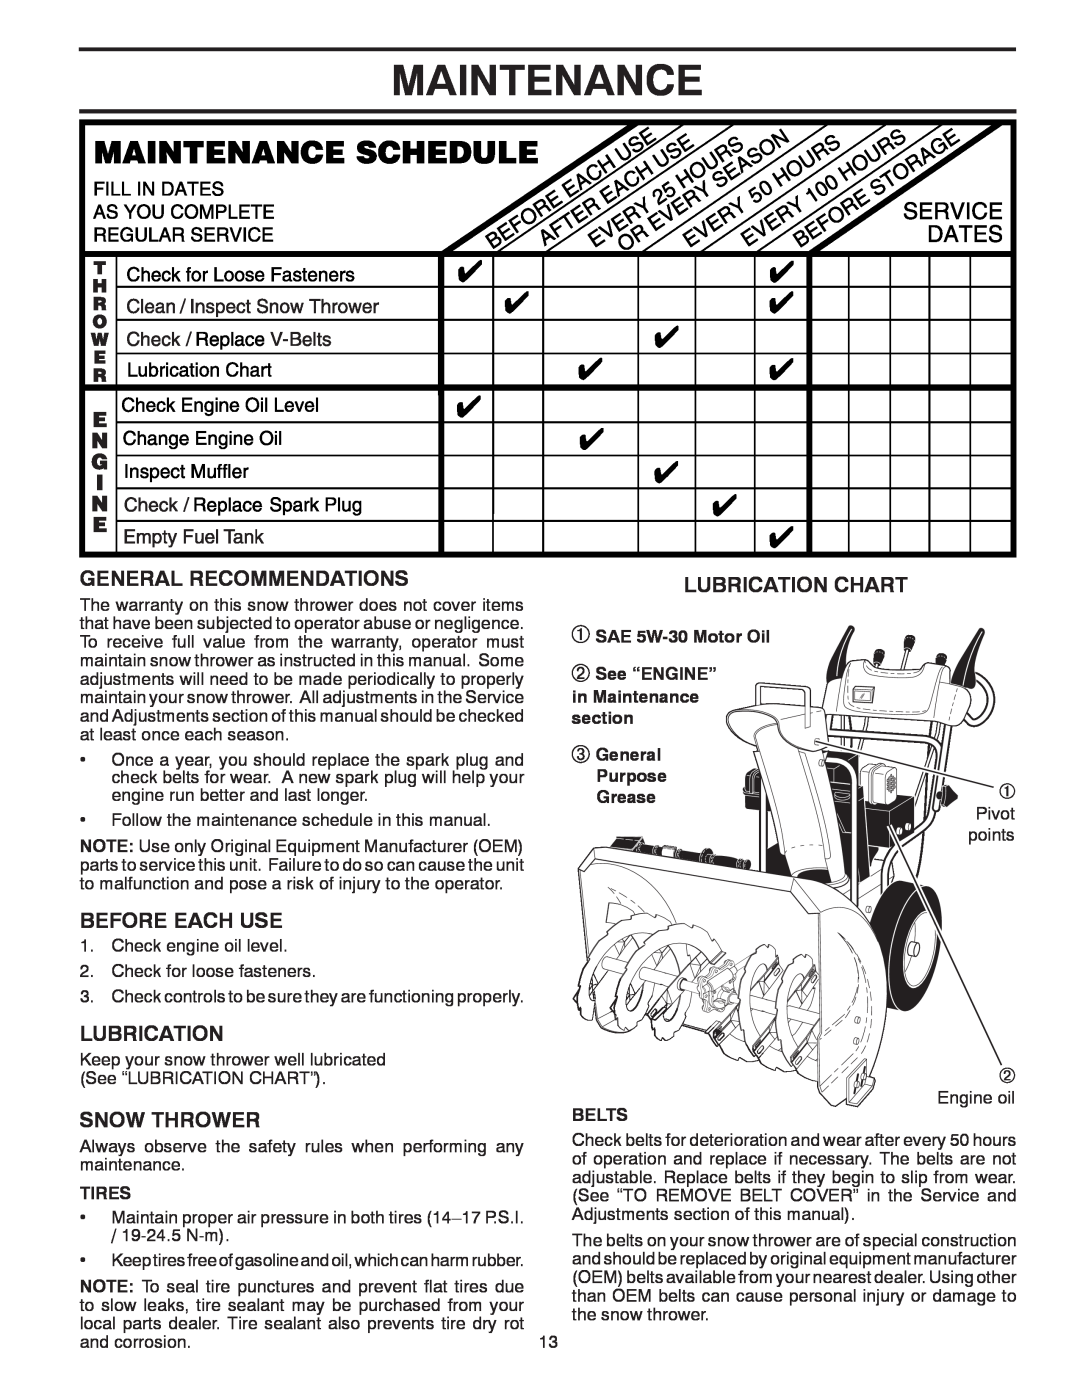 Poulan 421469 Maintenance, General Recommendations, Lubrication Chart, Before Each Use, Snow Thrower, Tires, Belts 